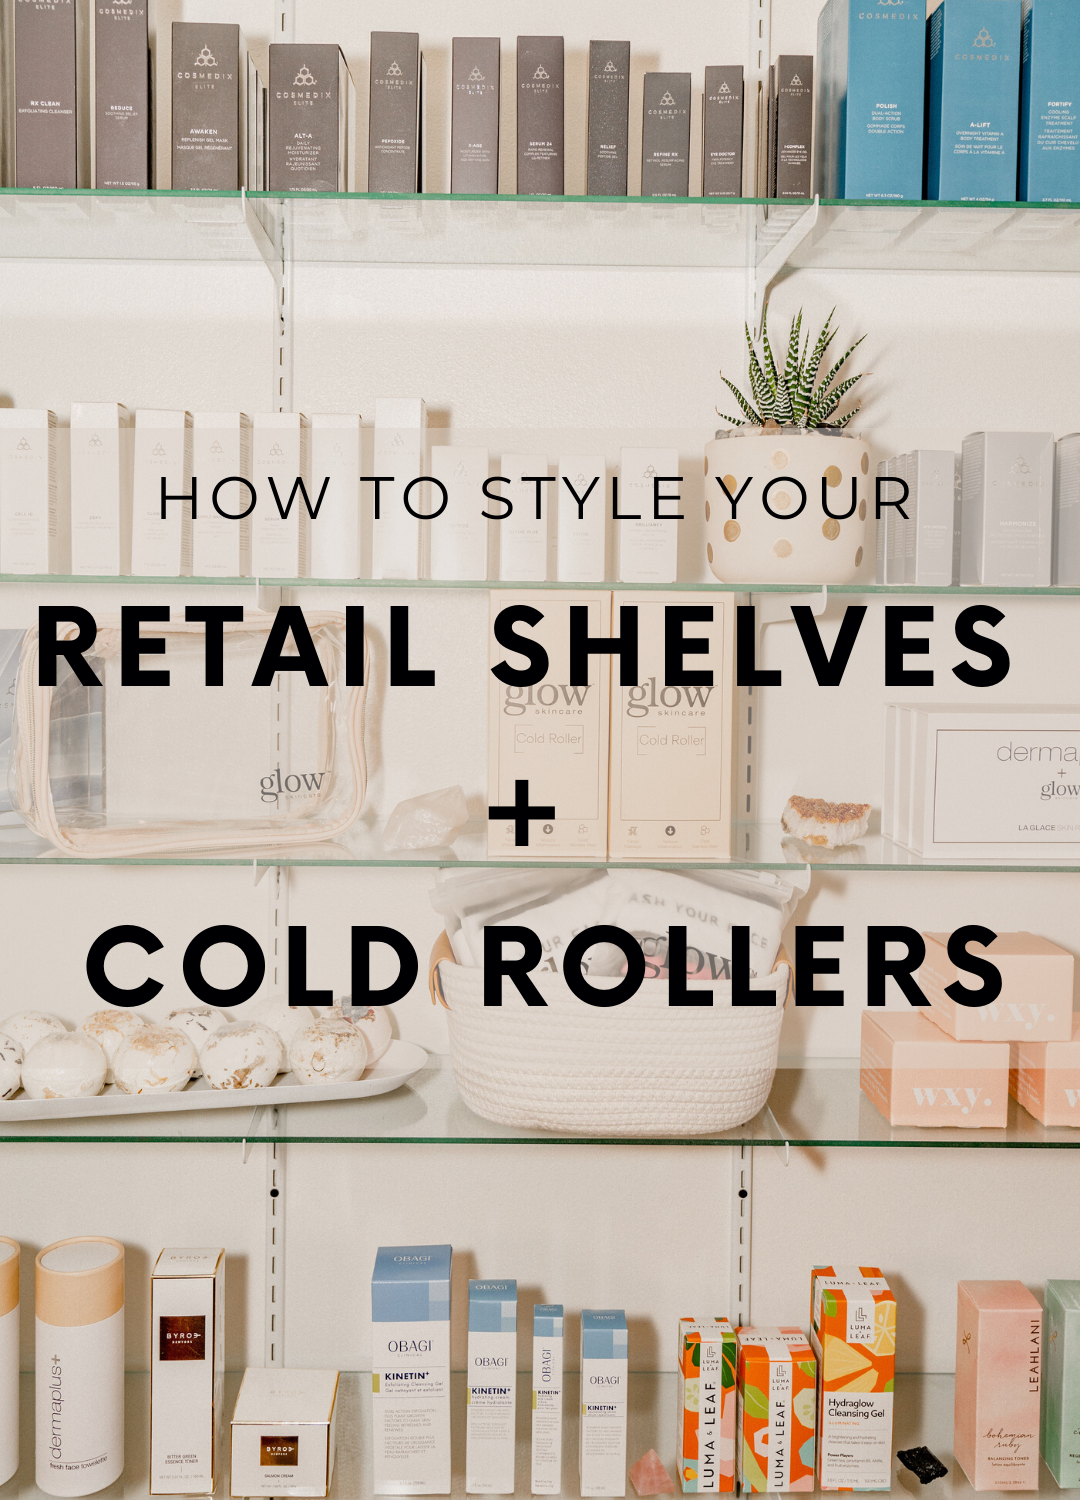 How to style your retail shelves + cold rollers